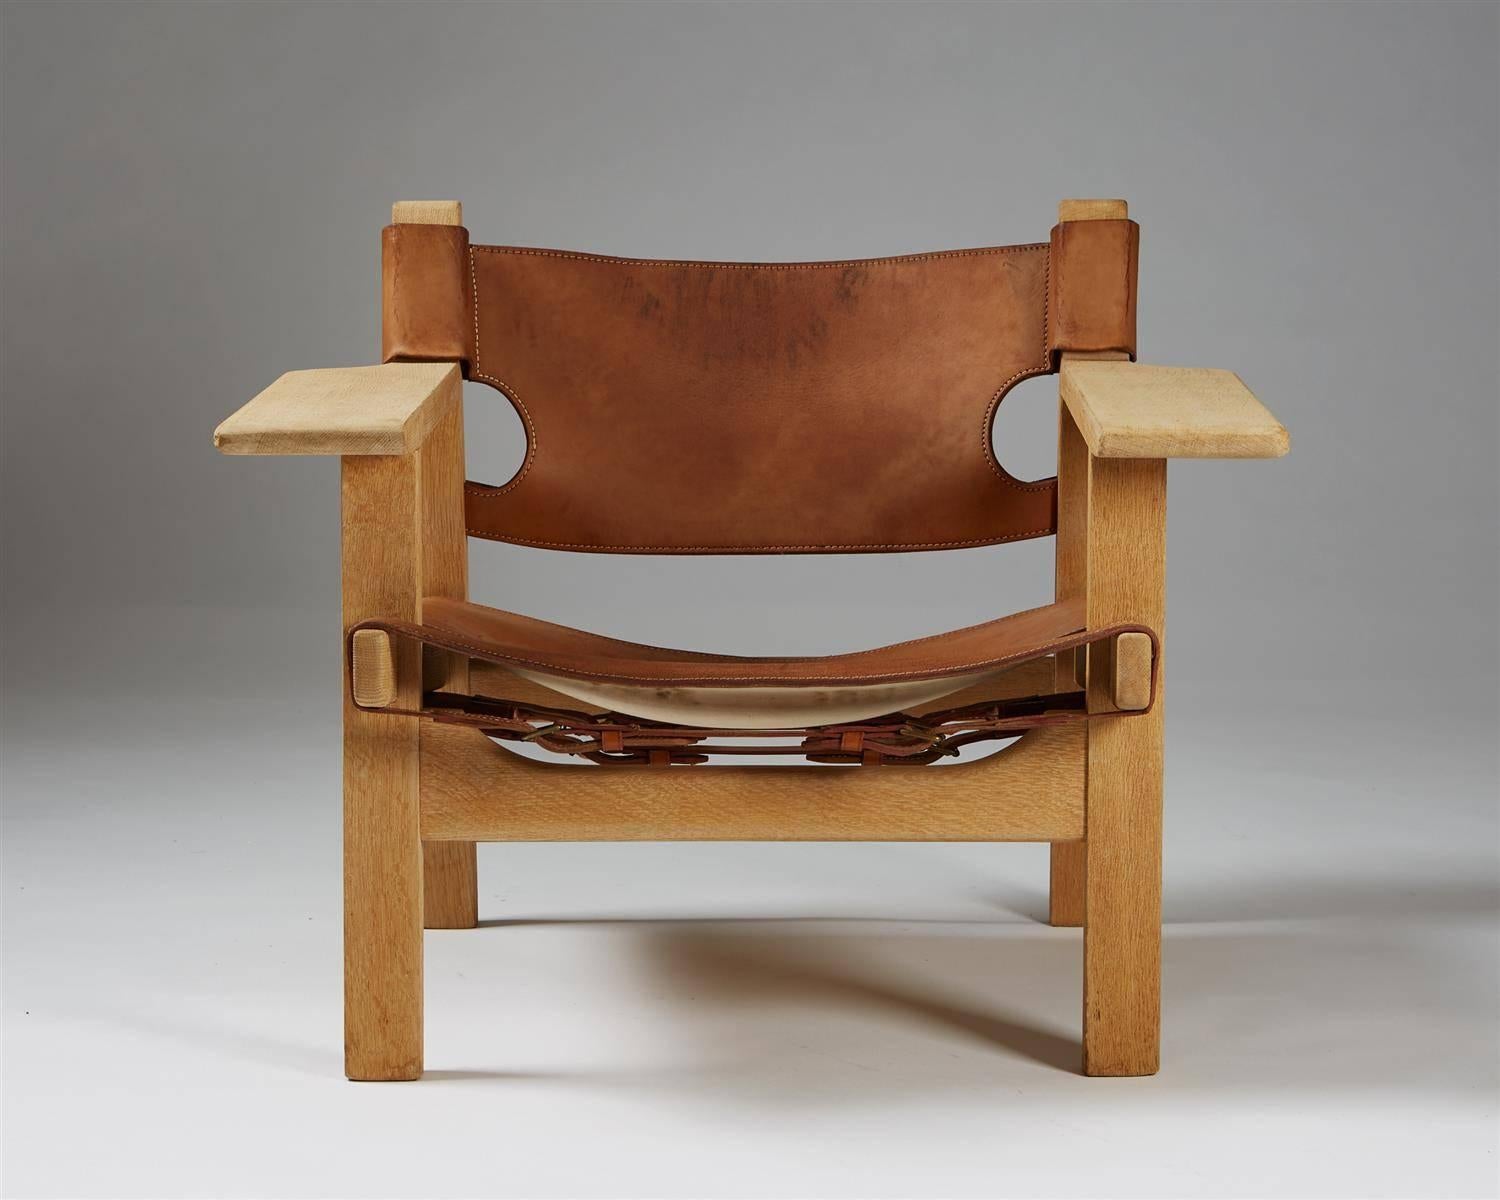 Armchair “Spanish Chair” designed by Börge Mogensen for Fredericia Stolefabriken, Denmark, 1950s.
Solid oak and original cognac leather.